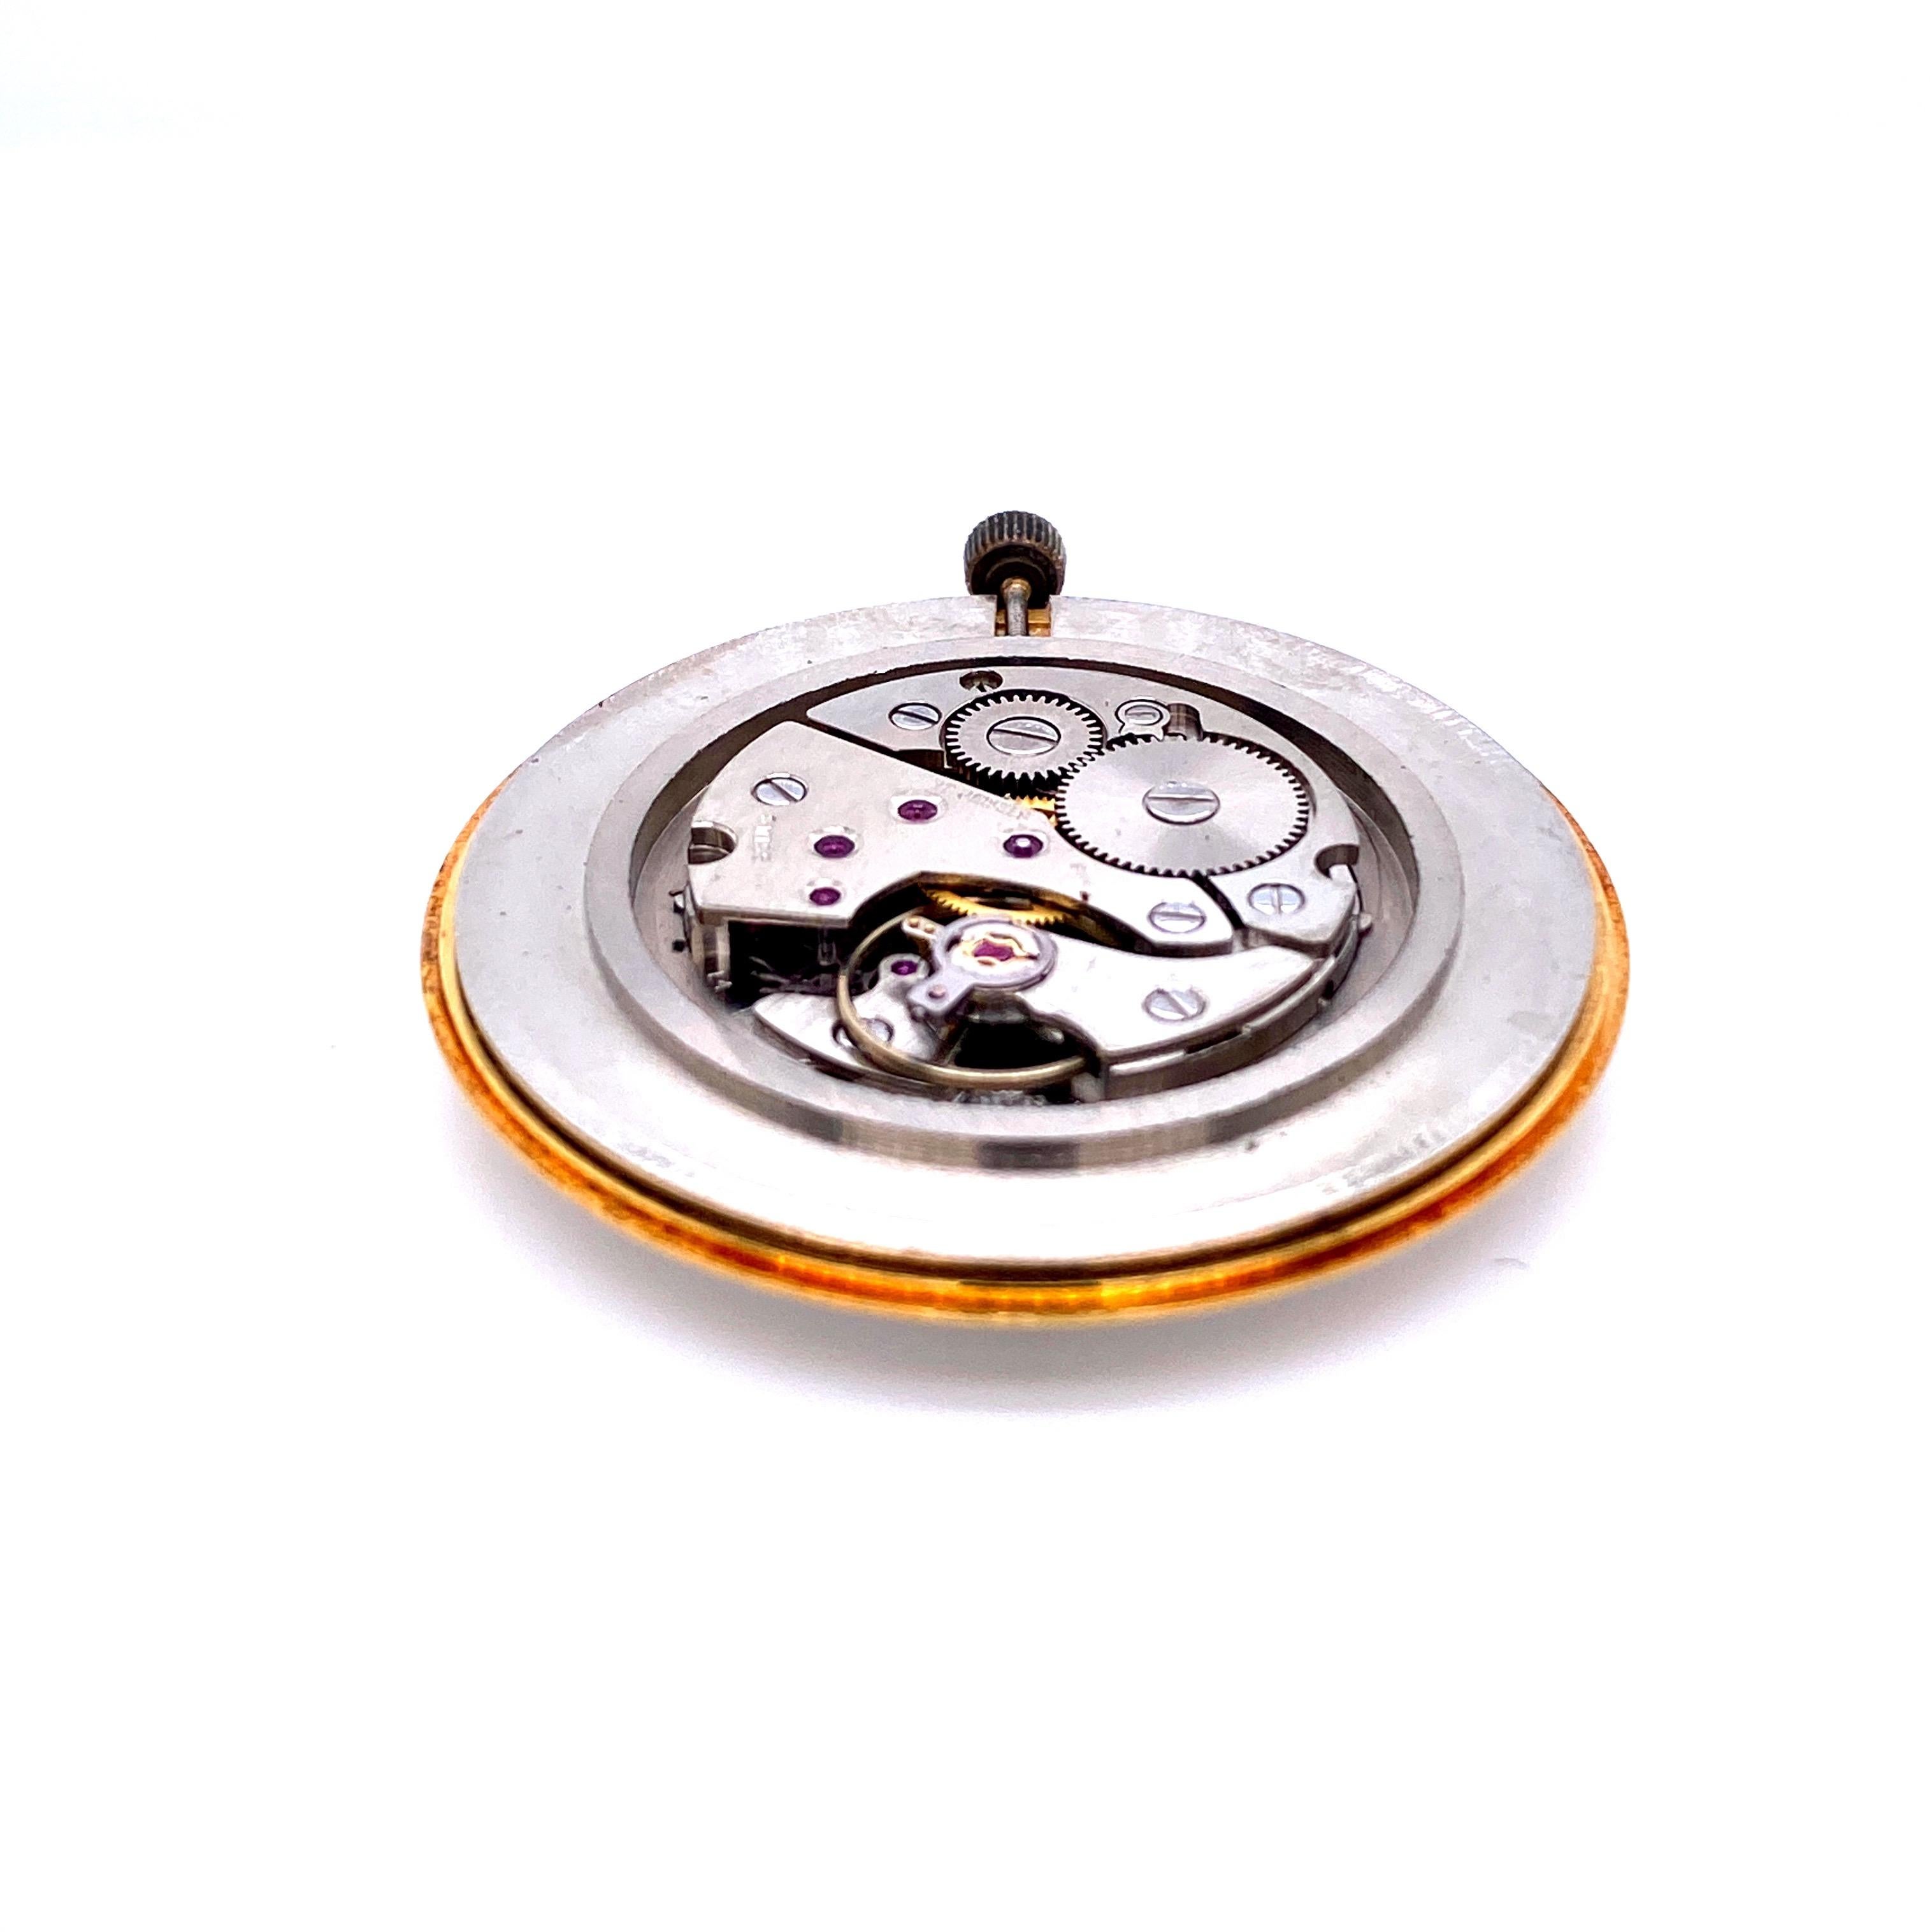 Retro Antique Gold-Plated Pocket Watch